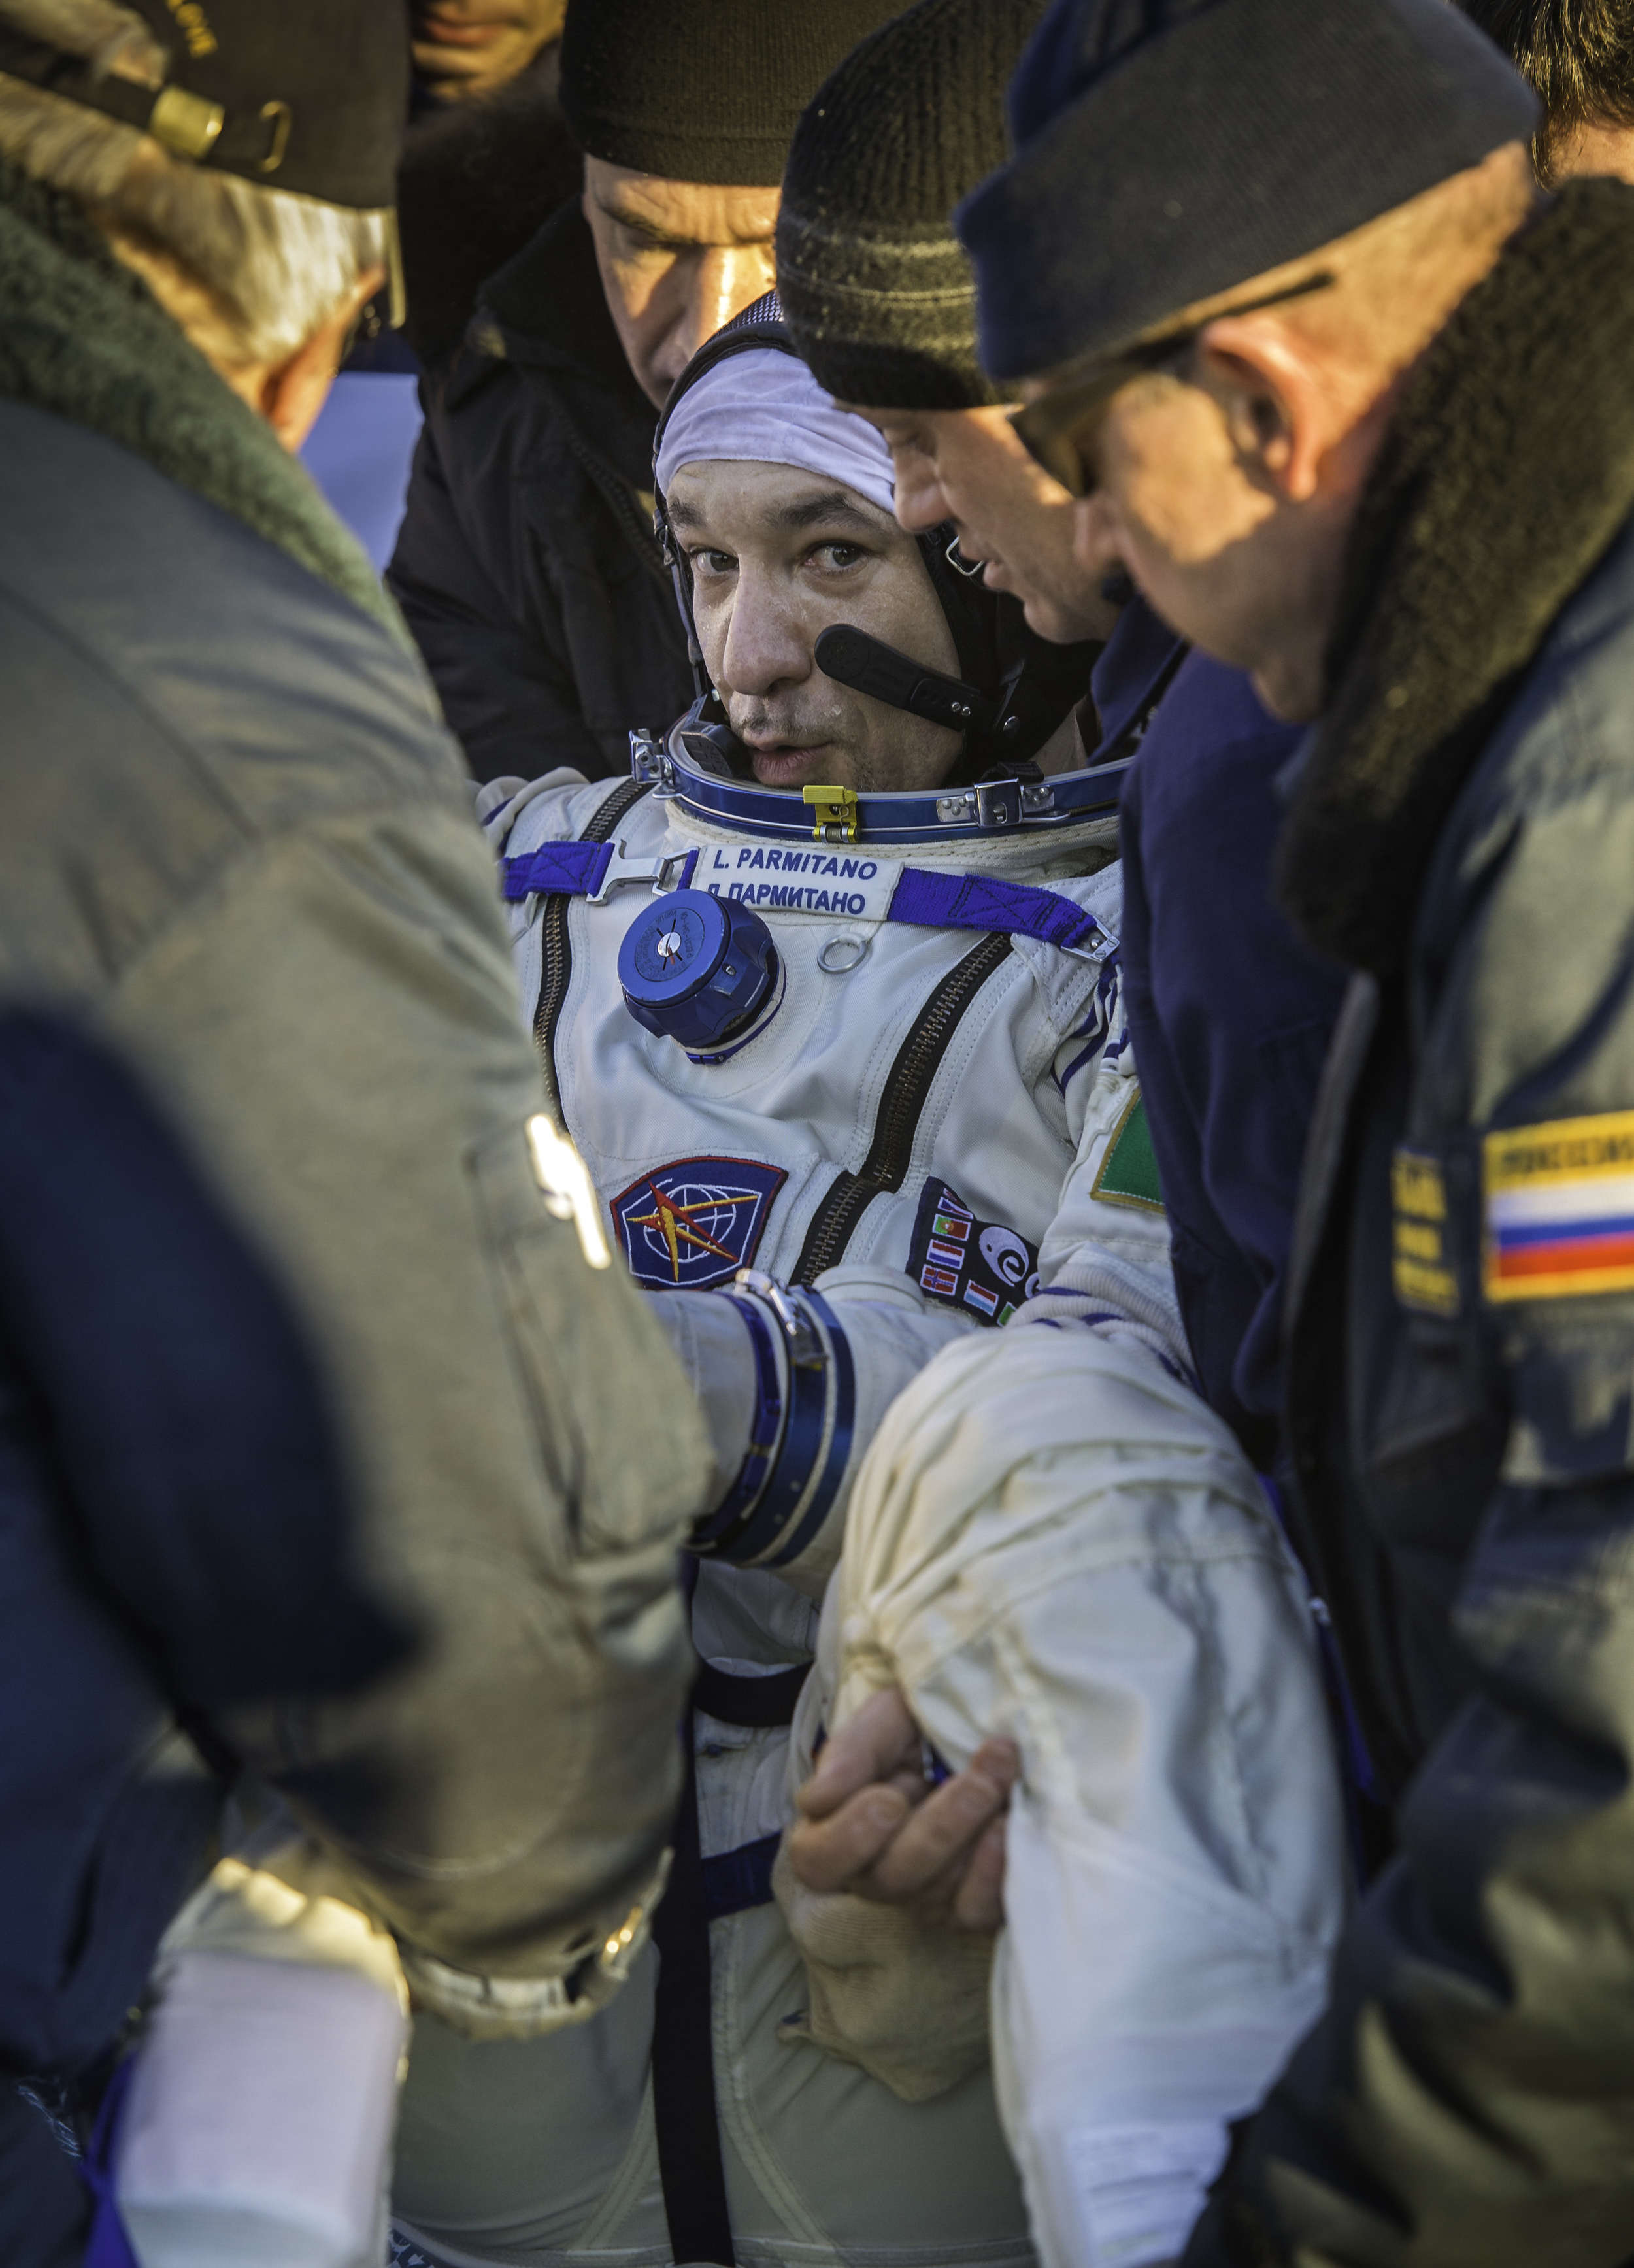  Expedition 37 Luca Parmitano of ESA (European Space Agency) is carried from the Soyuz TMA-09M spacecraft minutes after he landed in a remote area outside the town of Zhezkazgan, Kazakhstan, on Monday, Nov. 11, 2013. Parmitano, Expedition 37 Commande